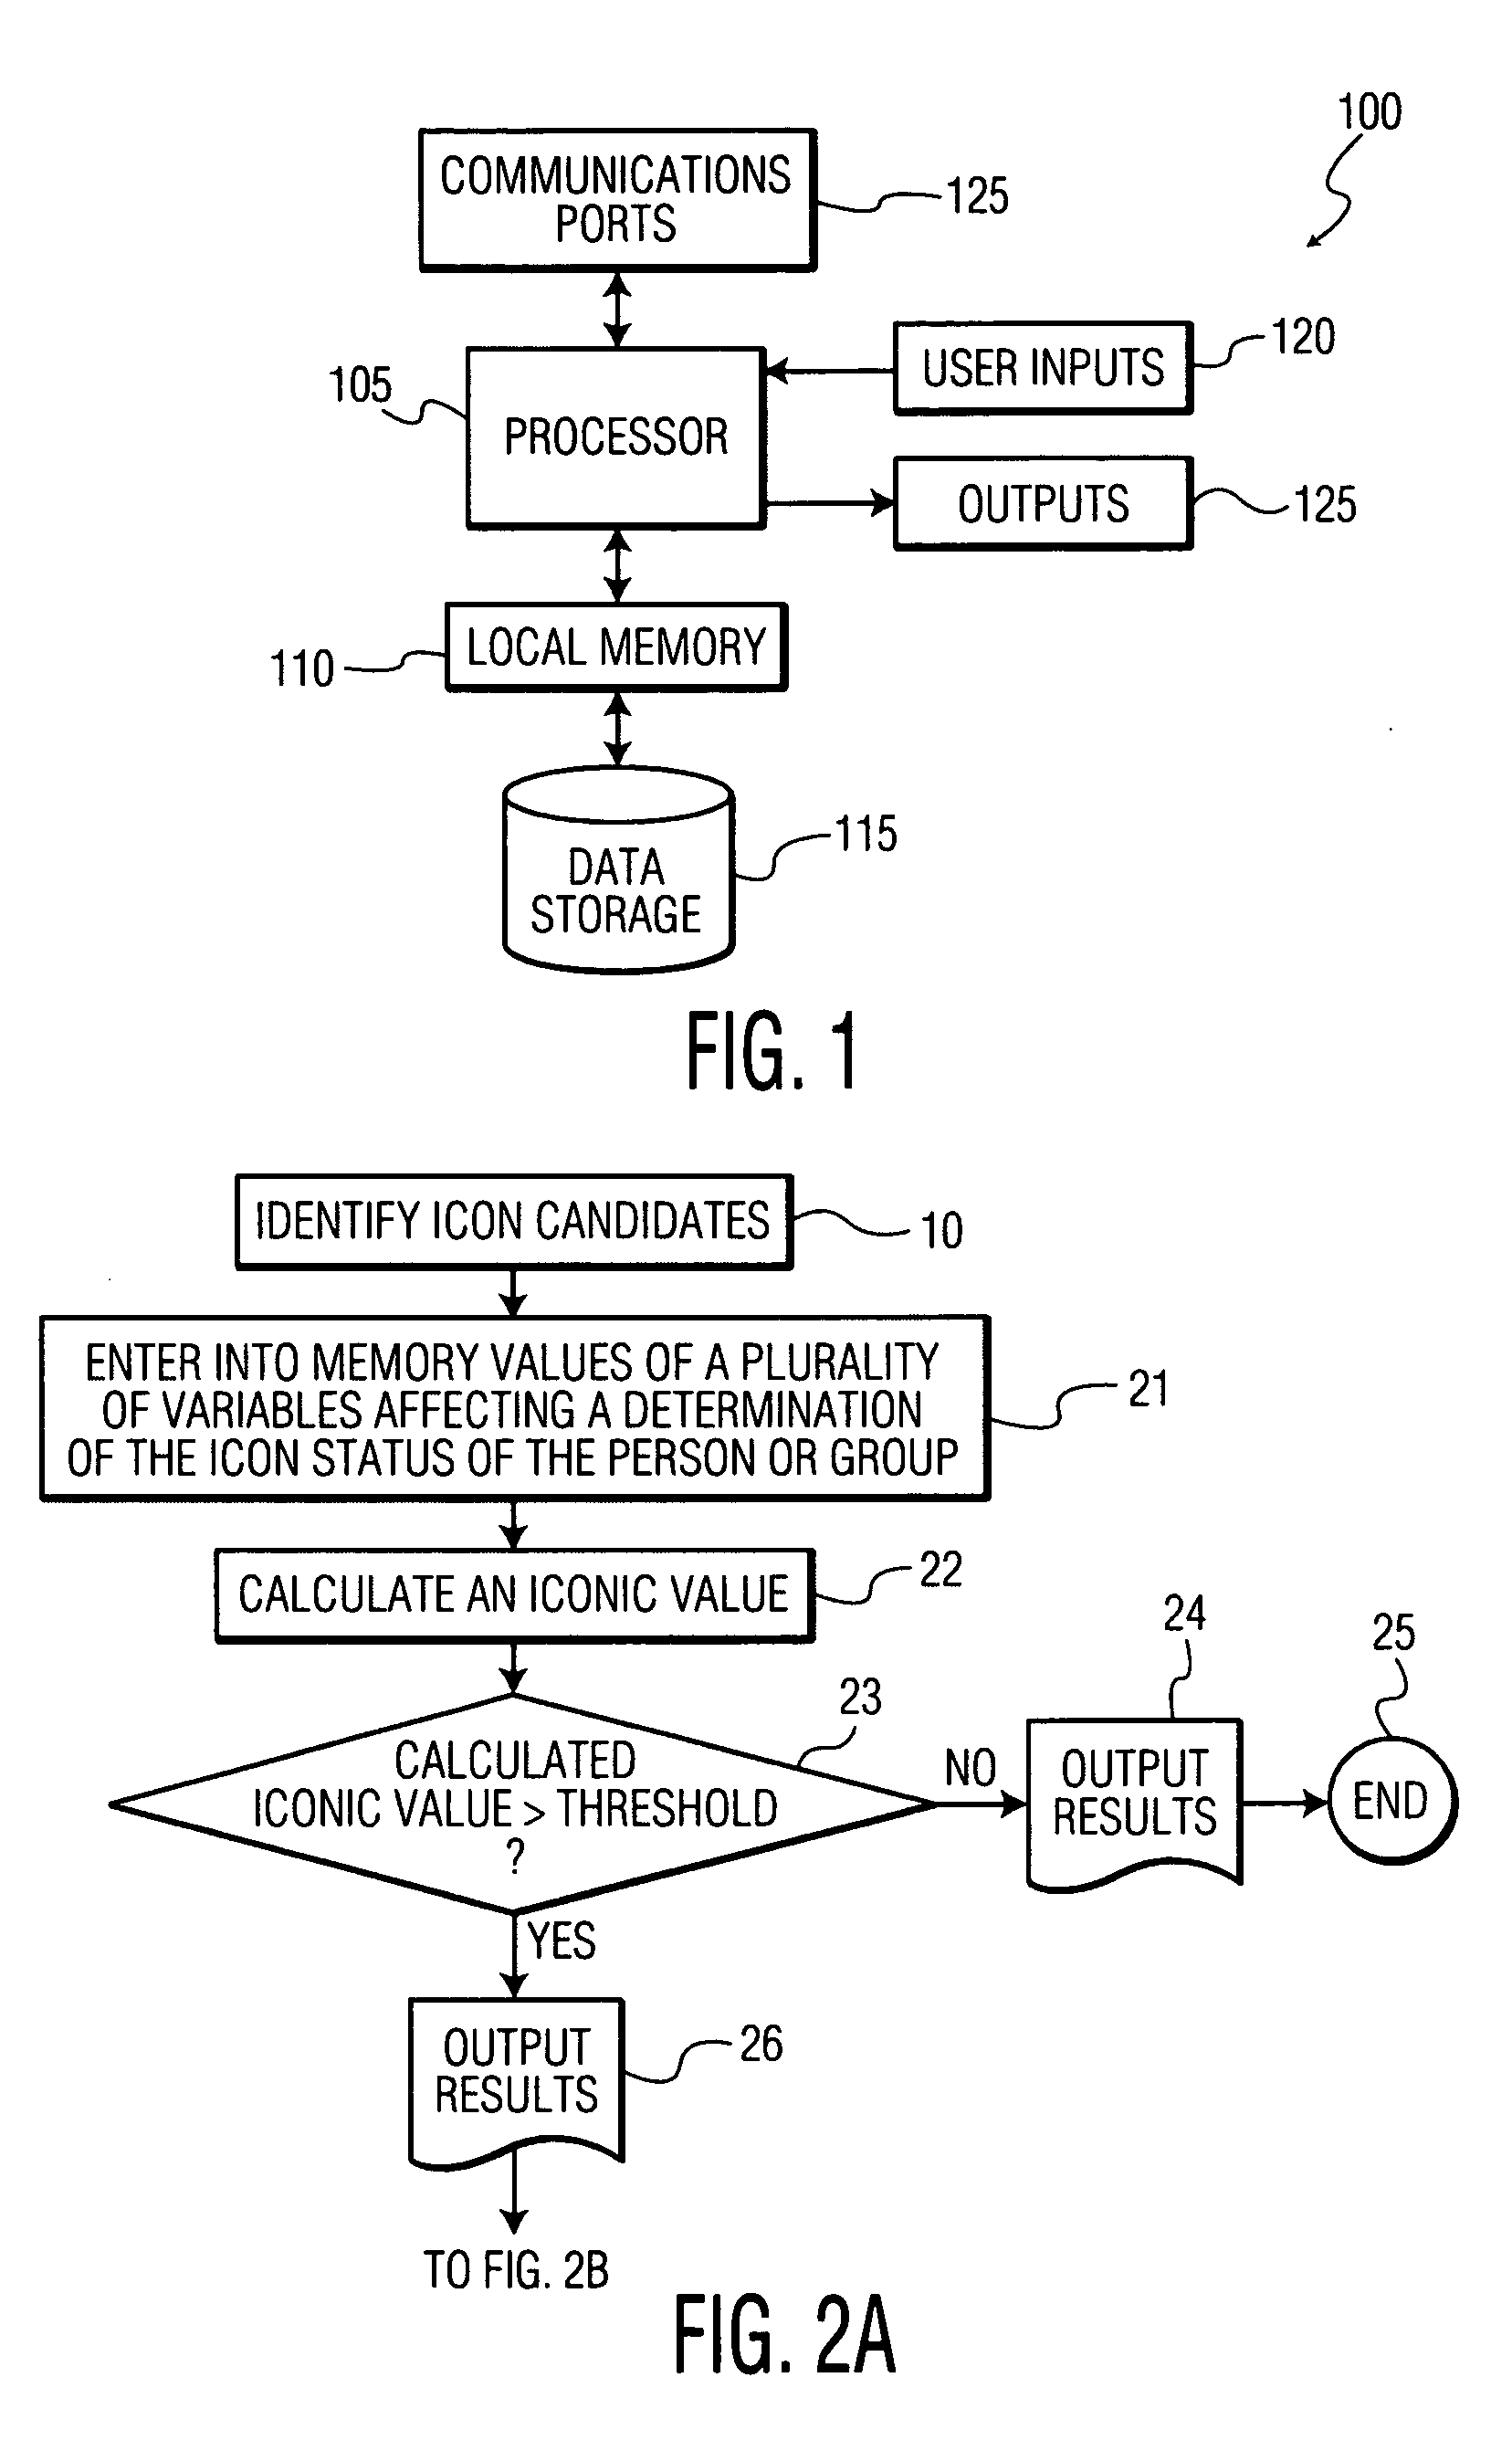 Computer system and method for development and marketing of consumer products